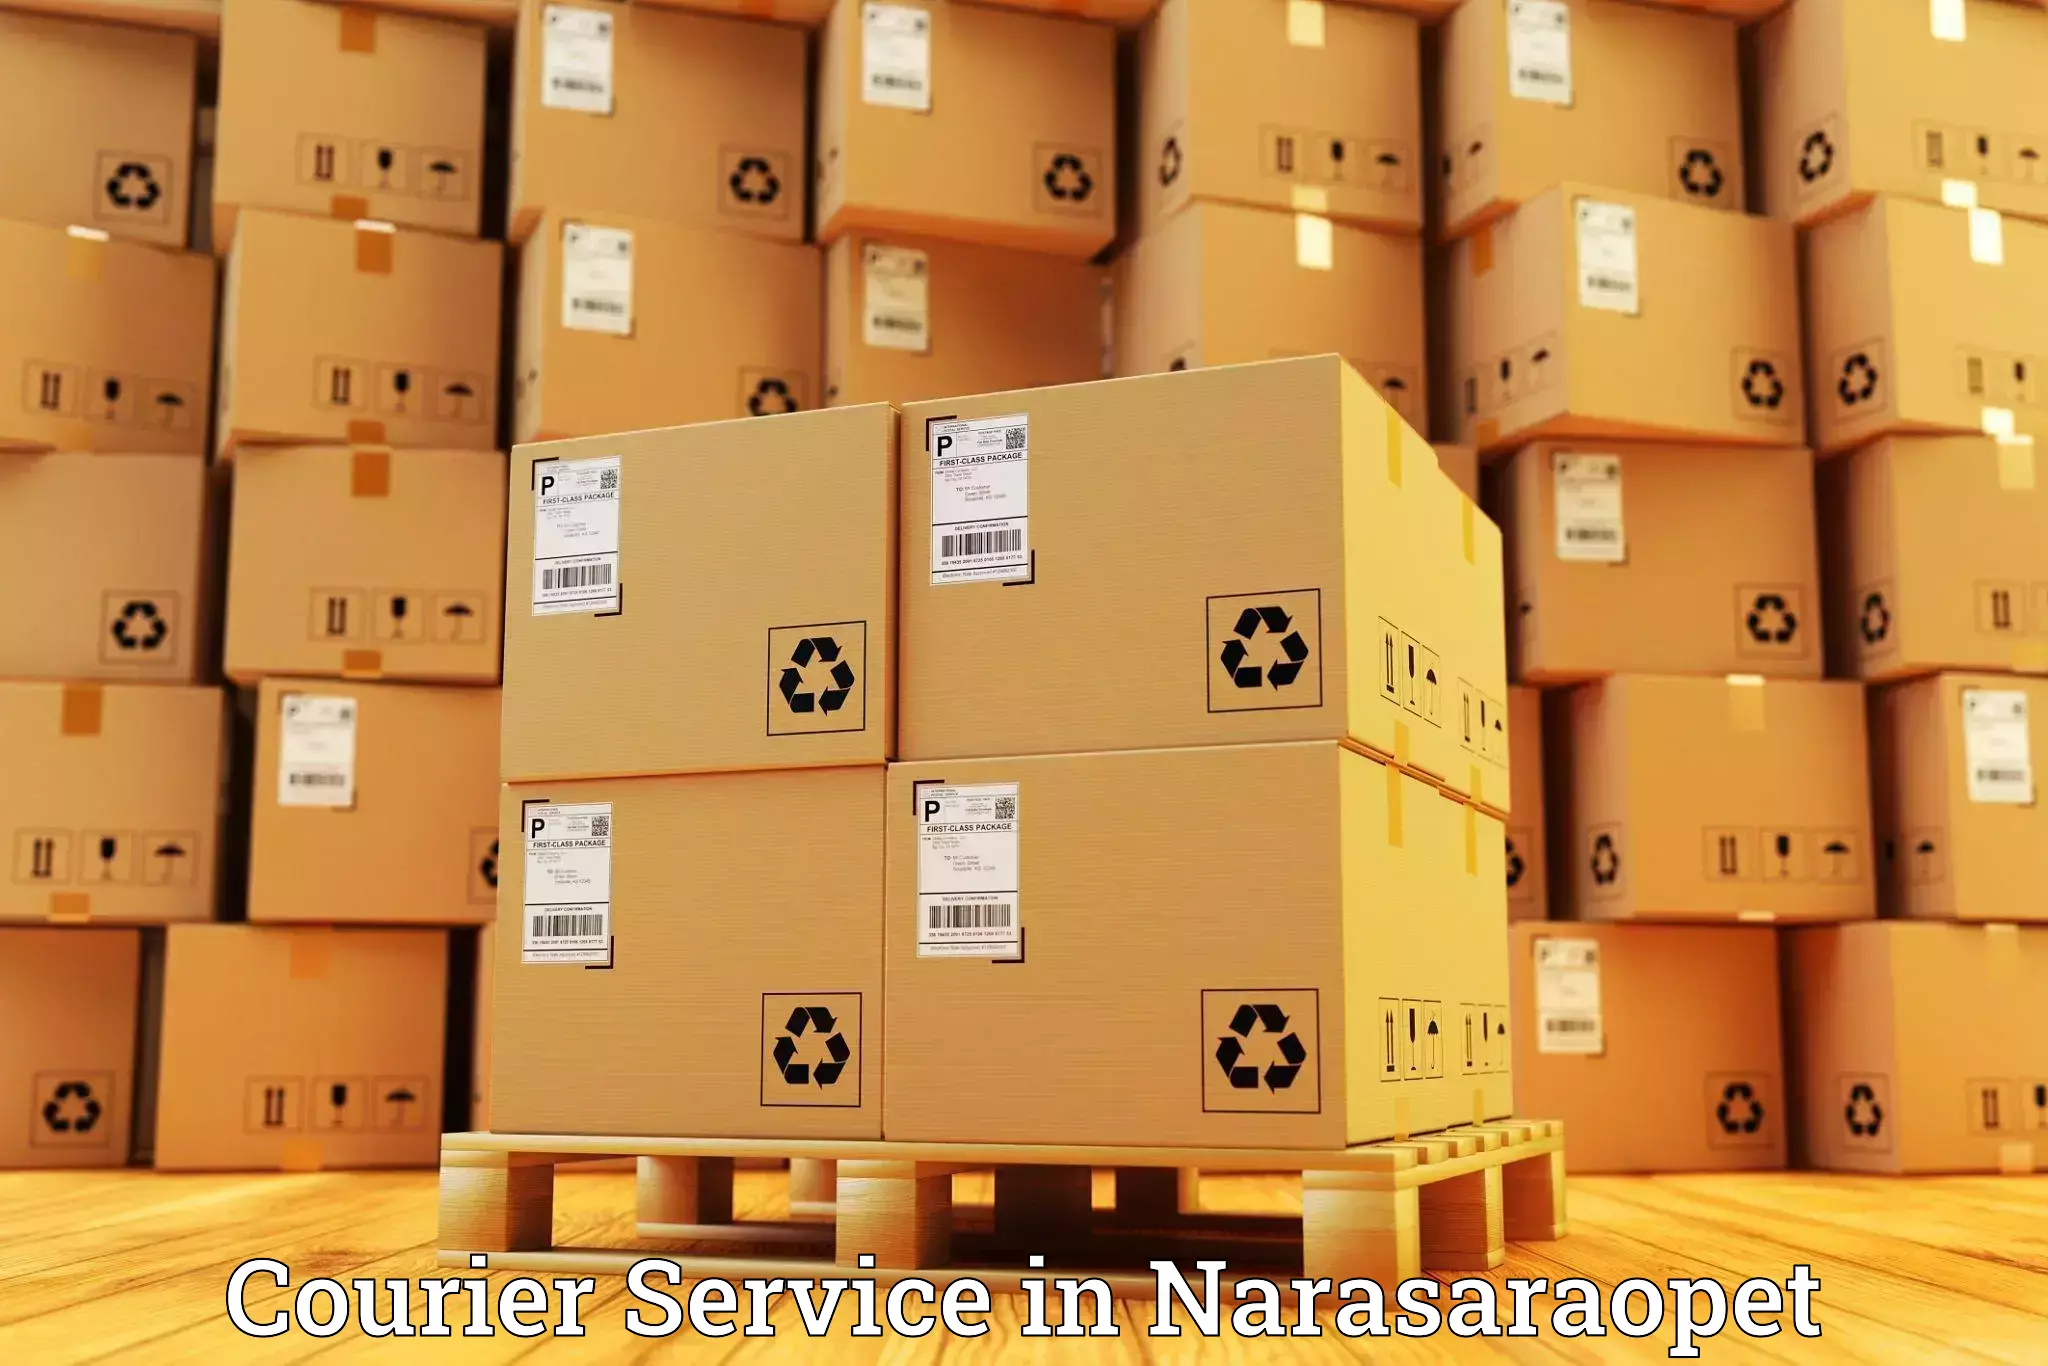 Advanced parcel tracking in Narasaraopet